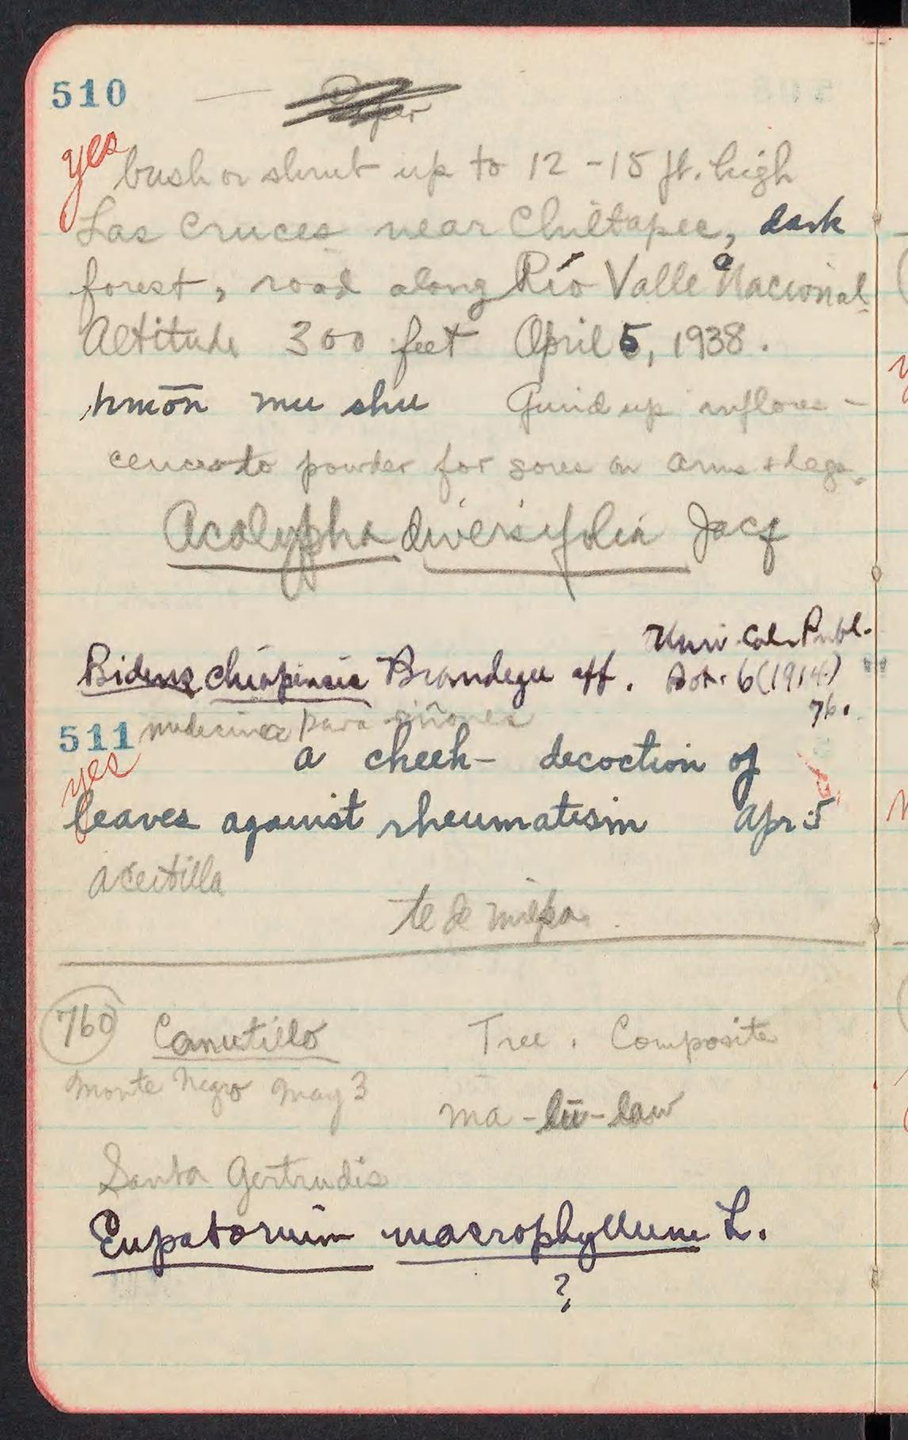 page from a handwritten notebook